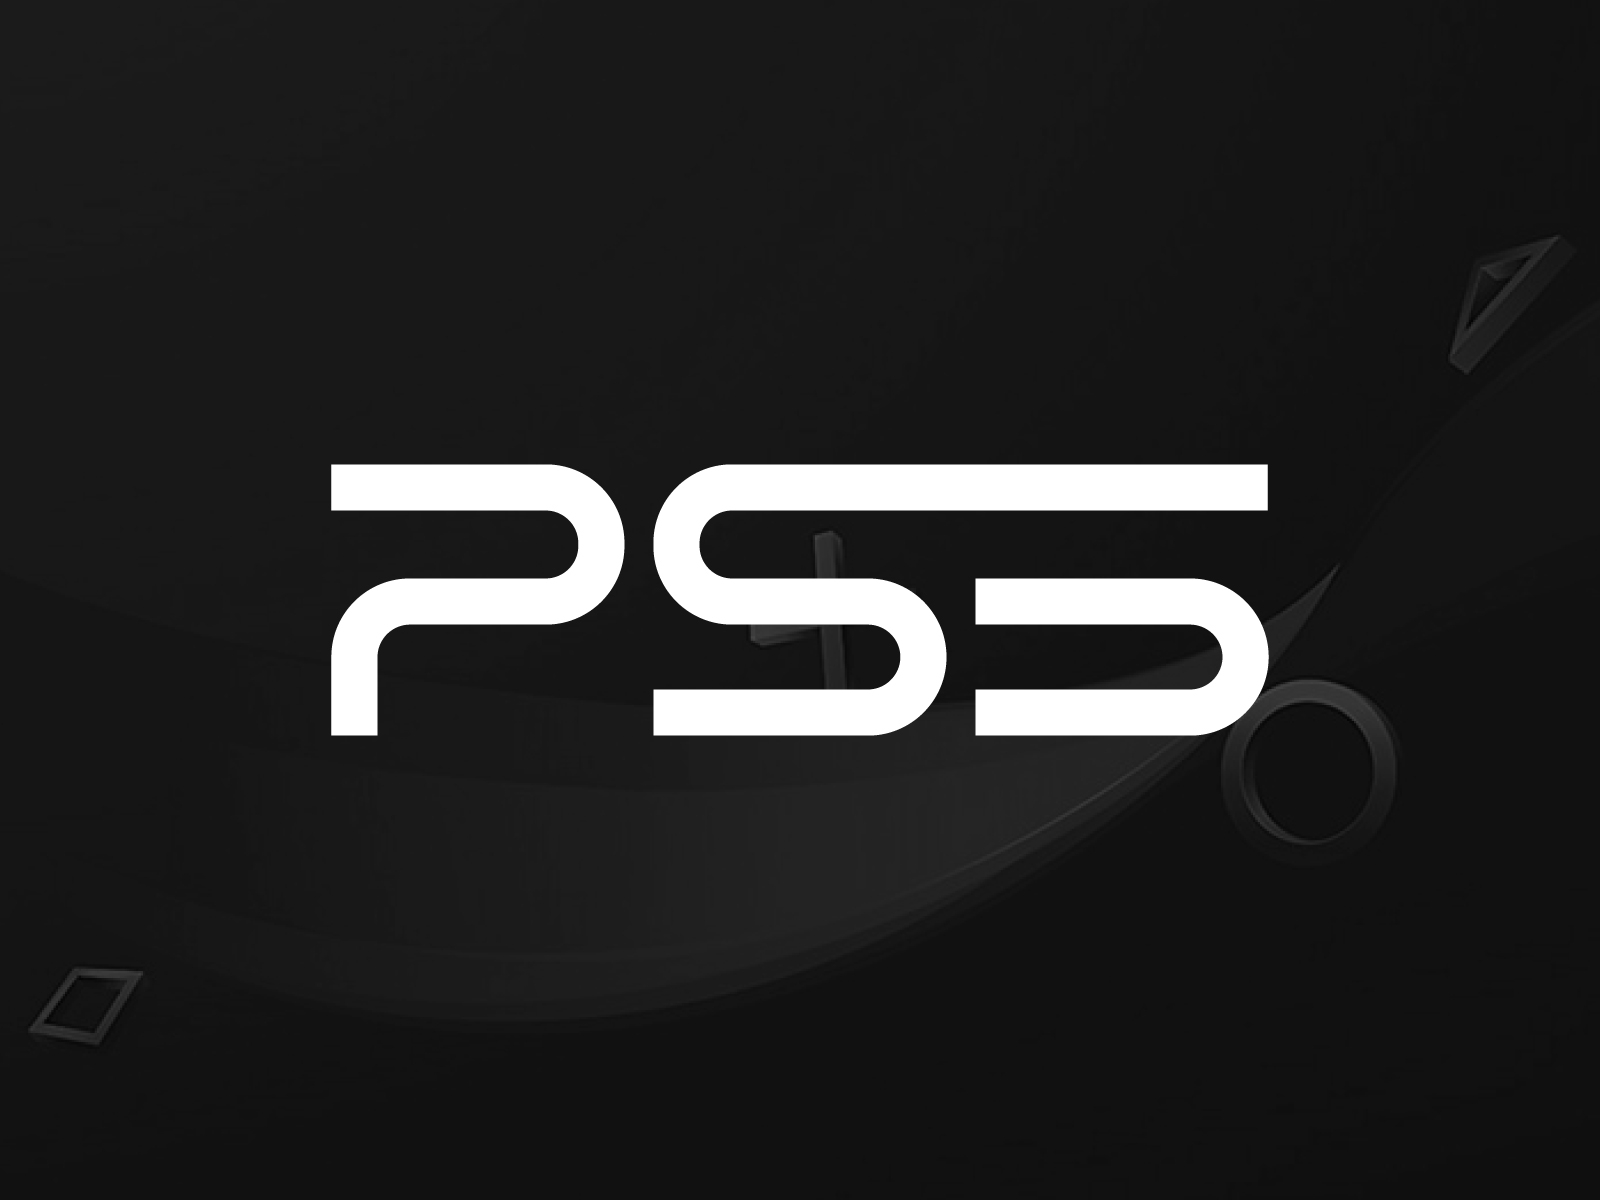 ps5 logo by leo on dribbble.